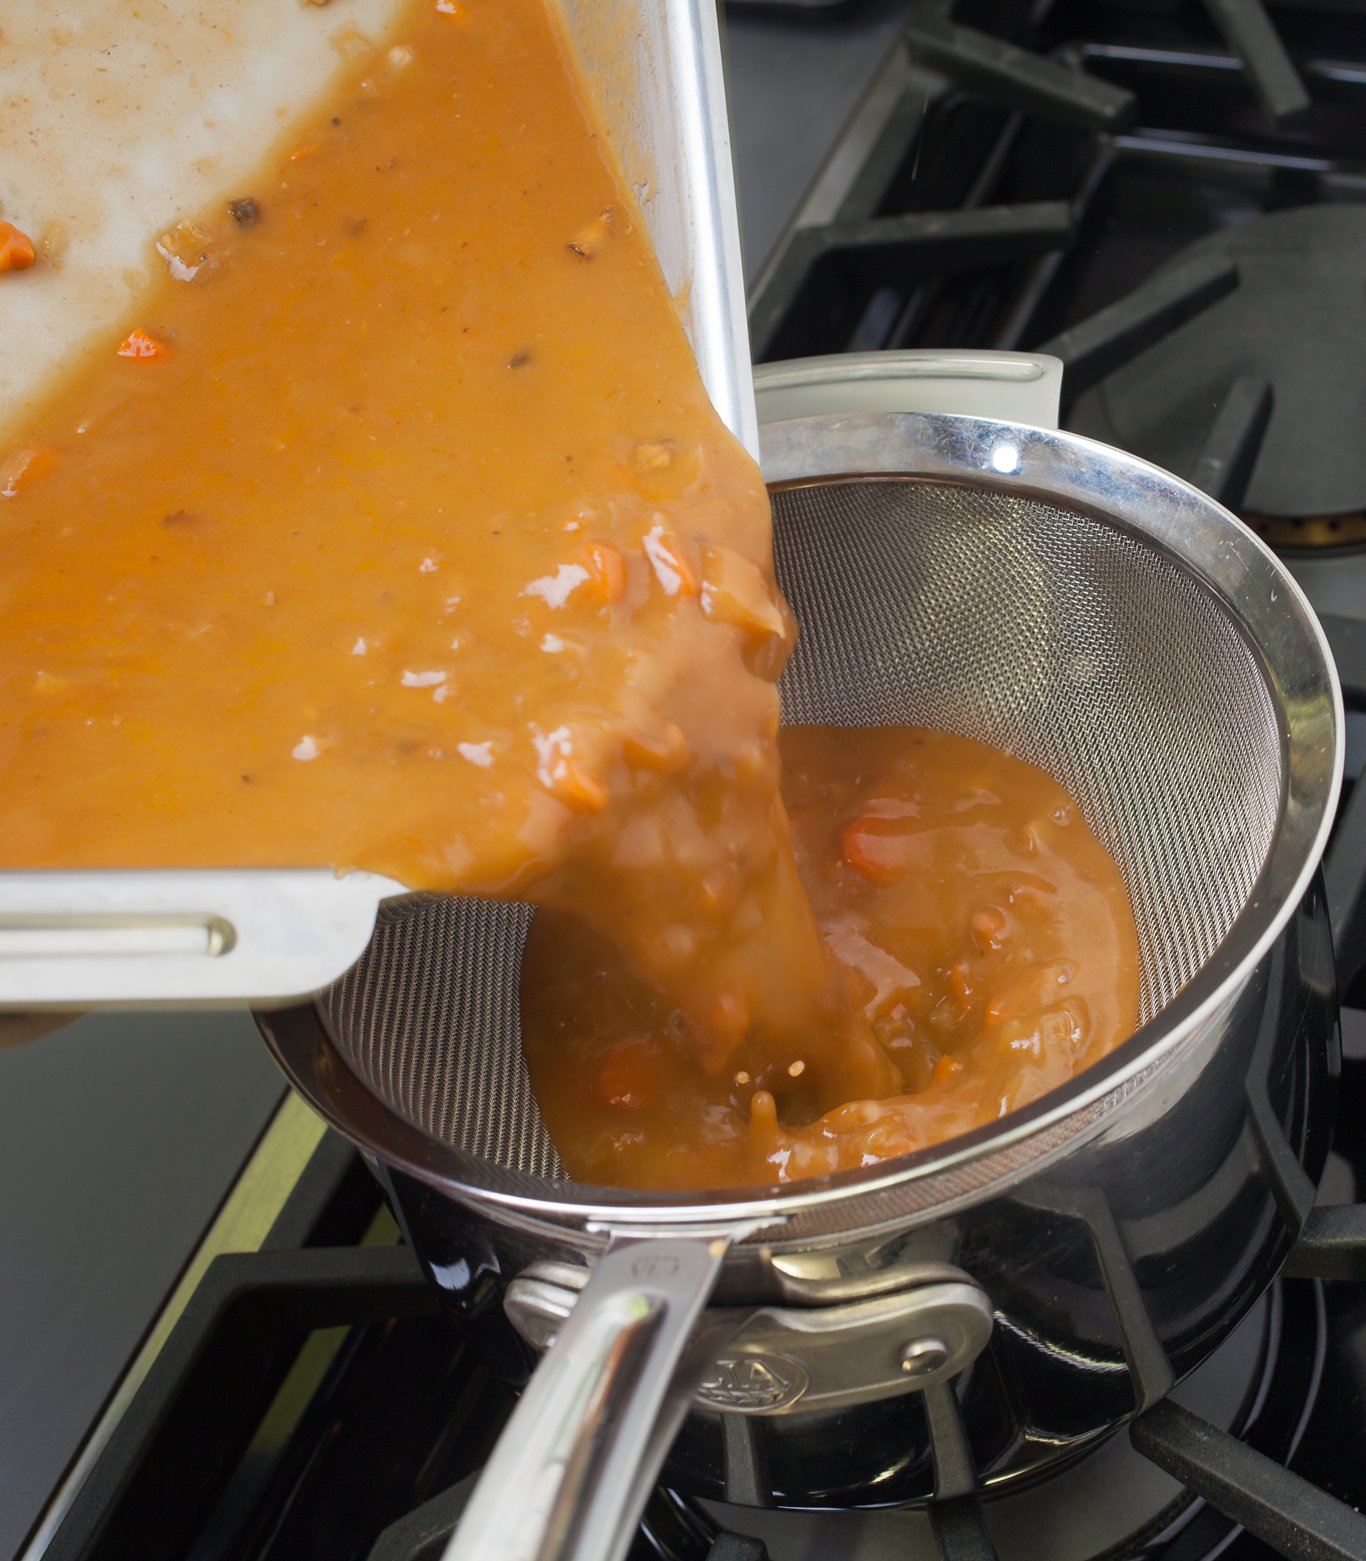 Make a pan sauce or gravy from the drippings that collect in the pan. If desired, strain the pan gravy before serving.